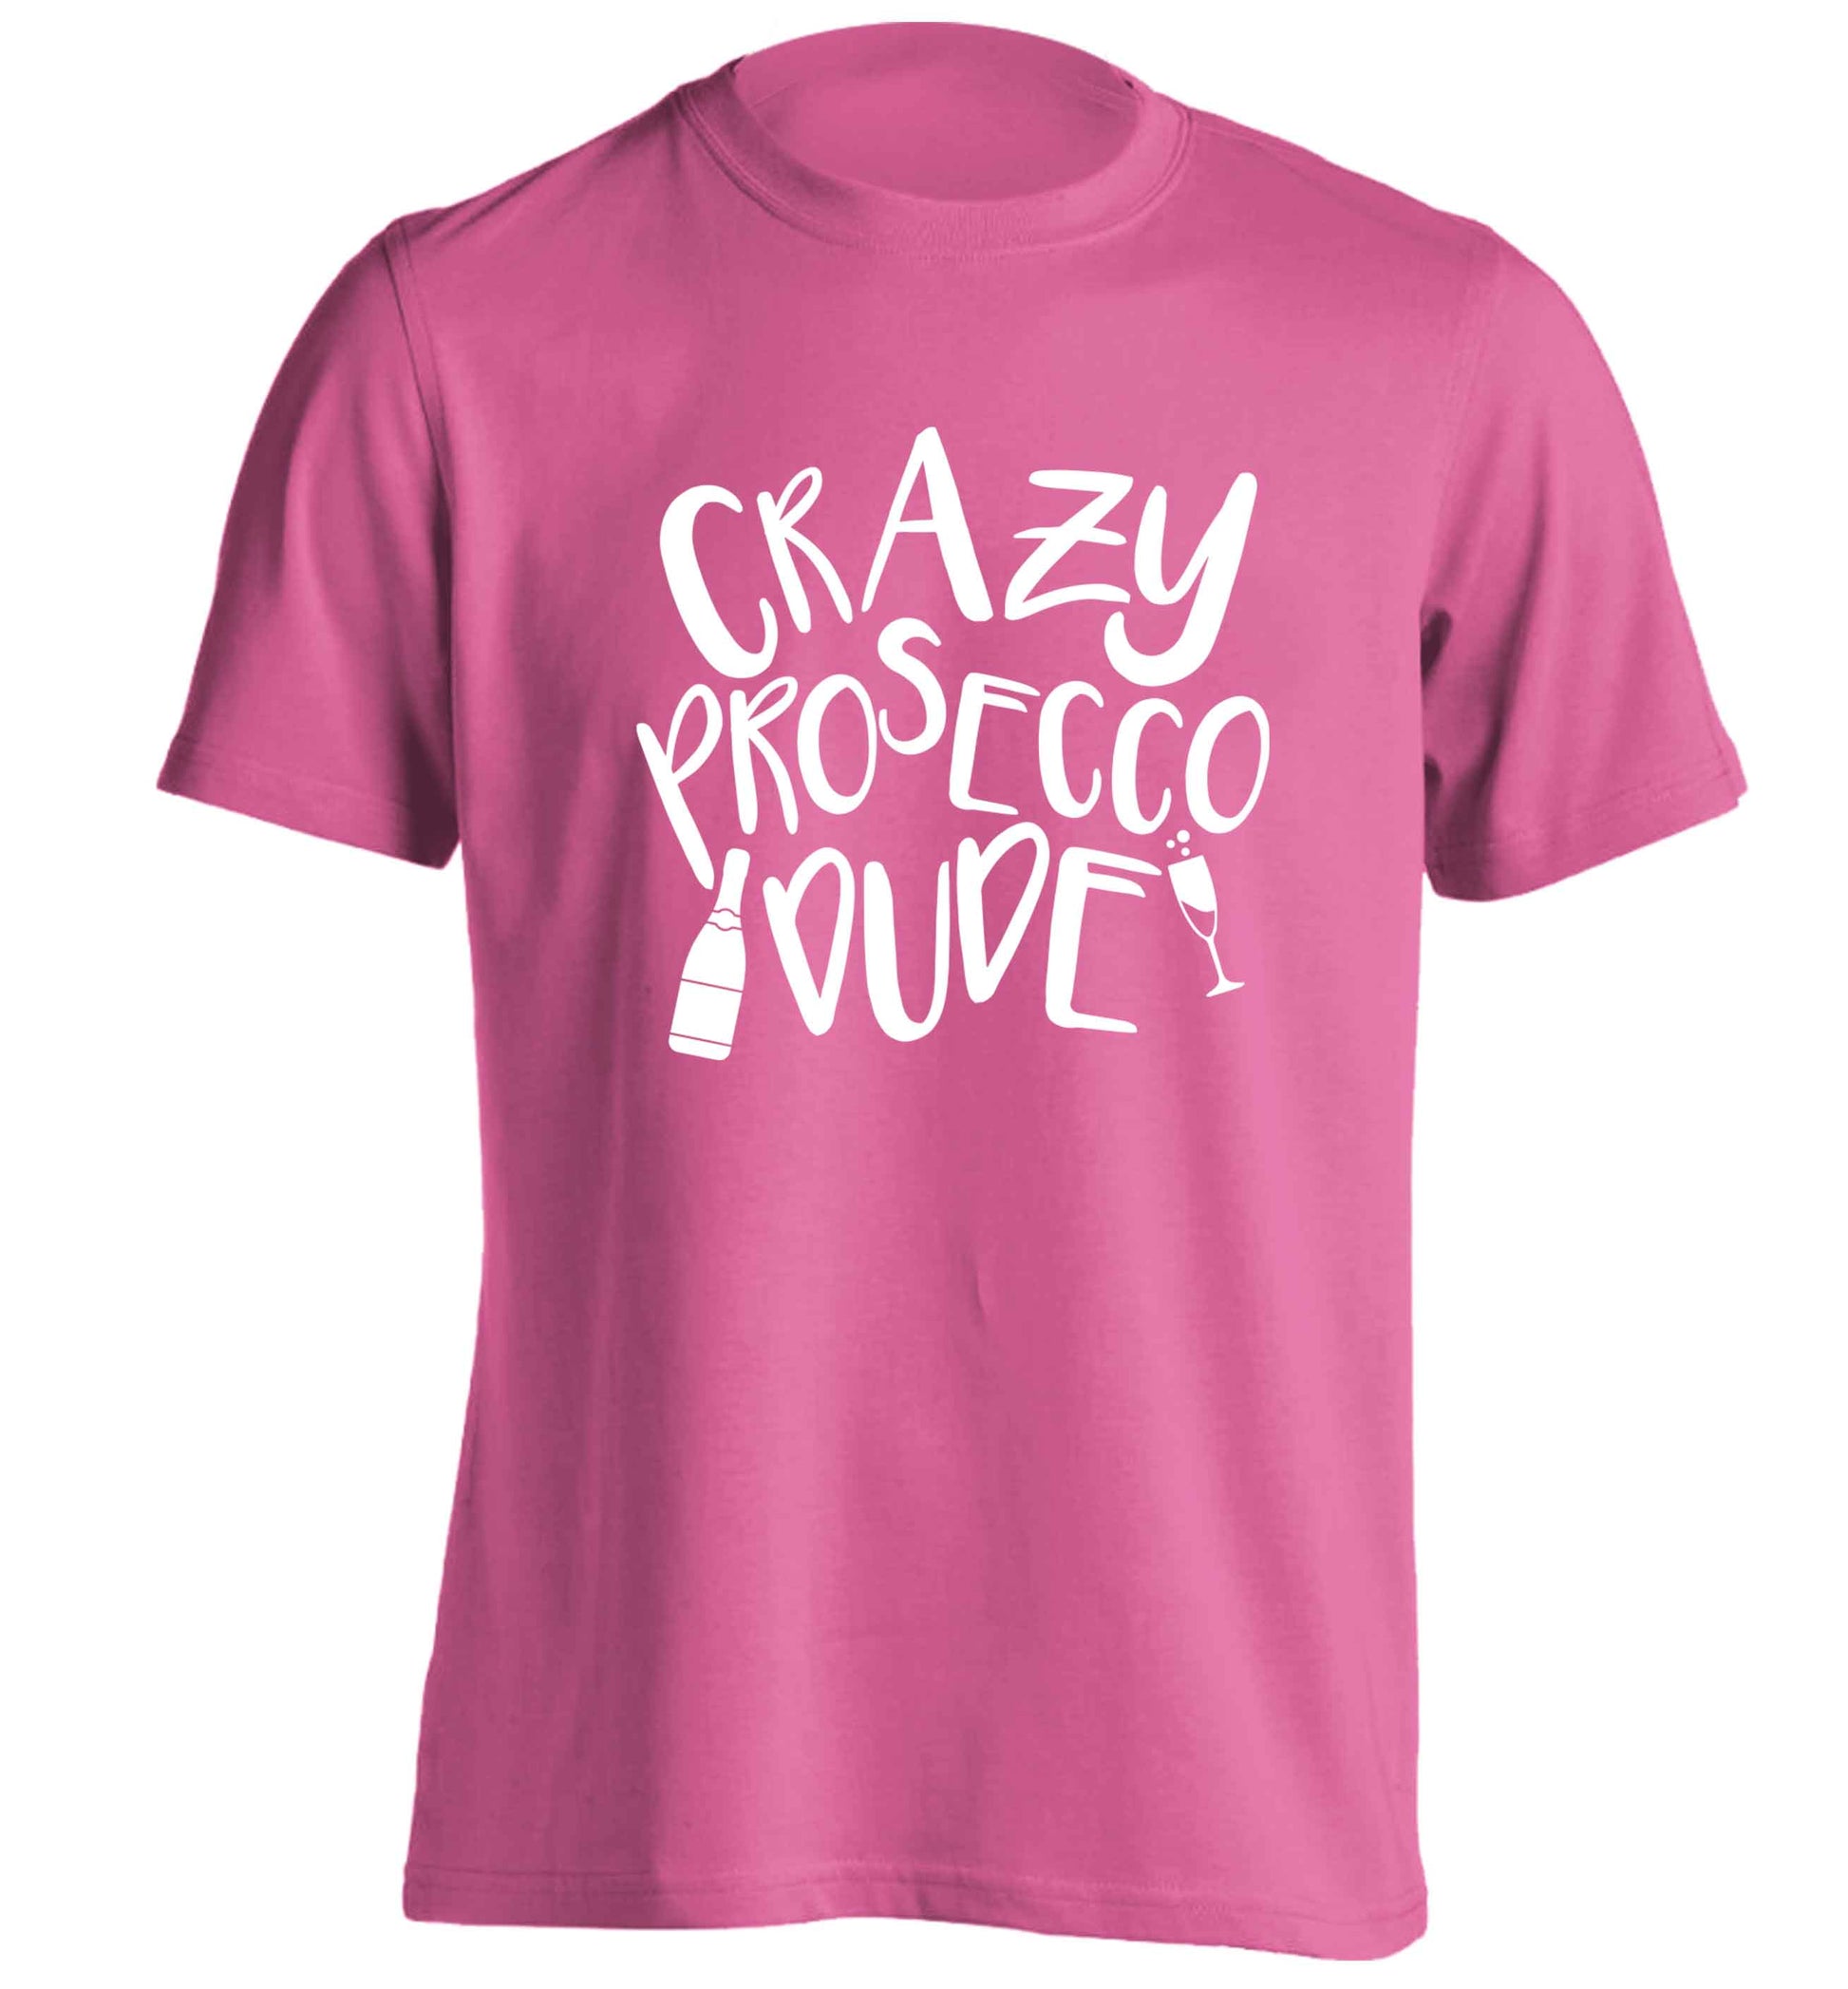 Crazy prosecco dude adults unisex pink Tshirt 2XL